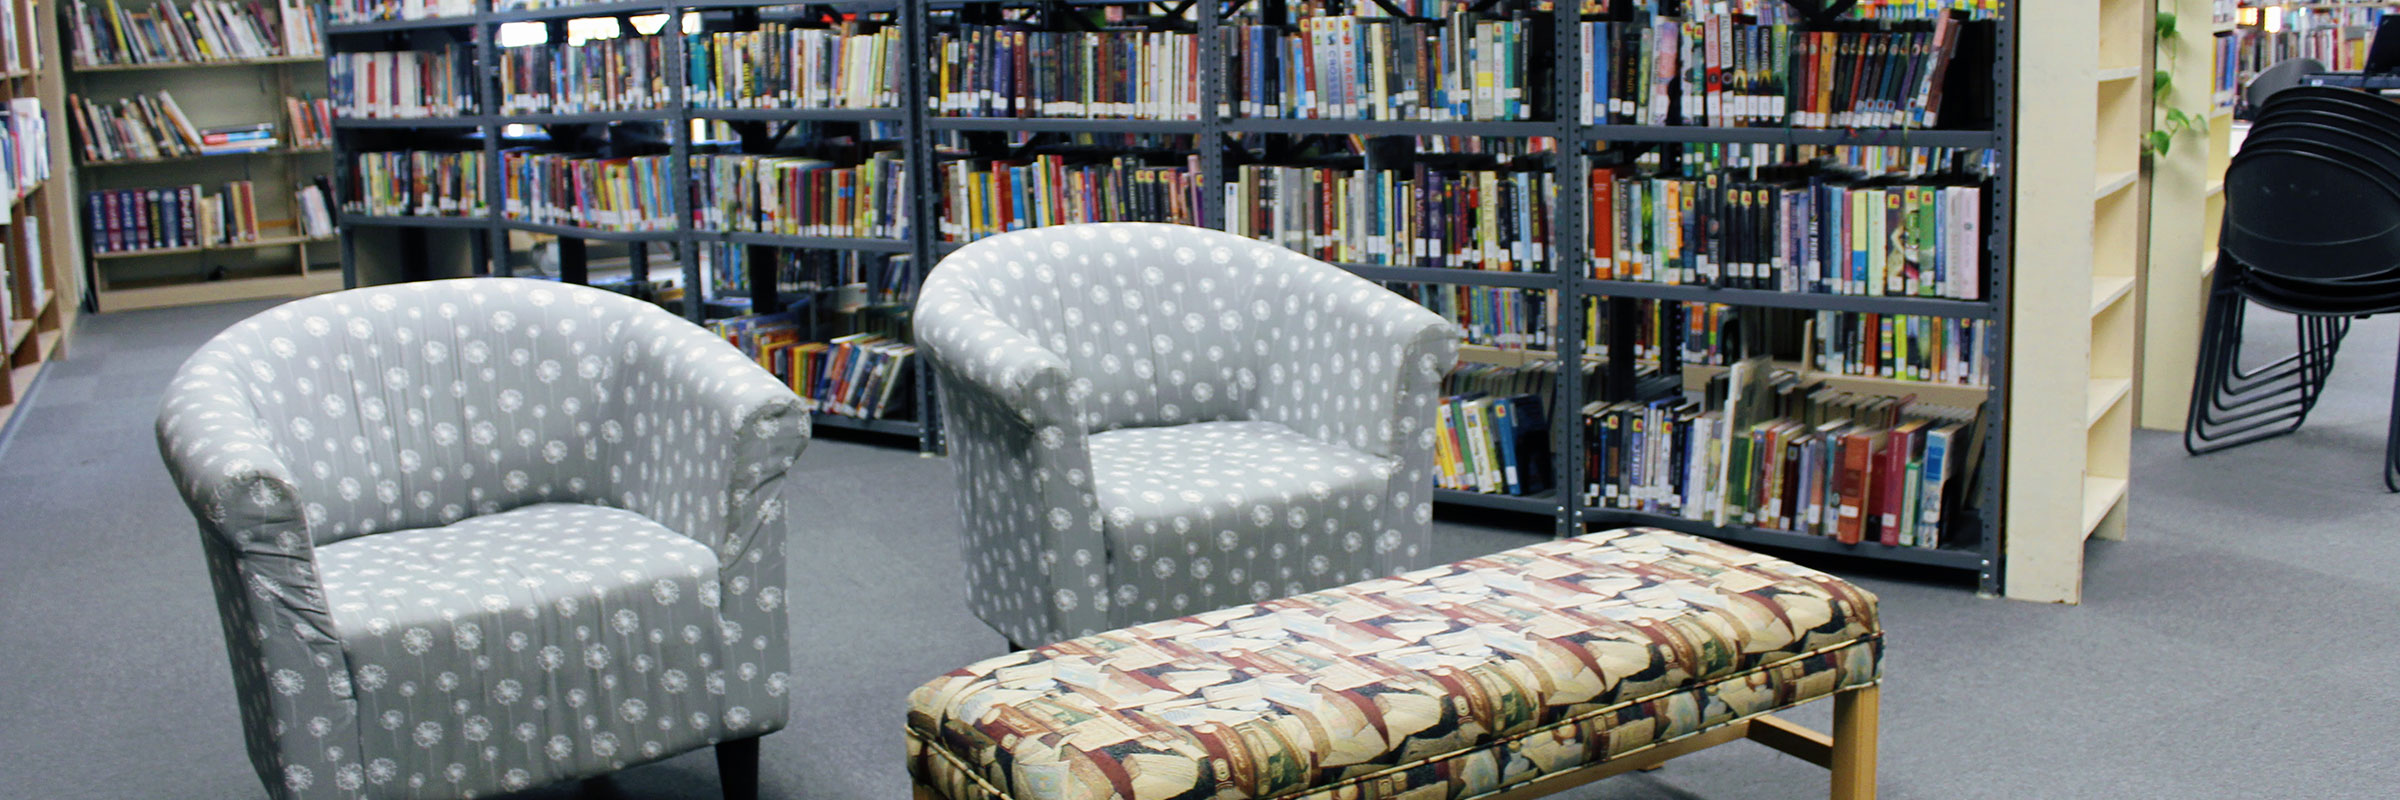 Chairs in front of shelves of books inside the Dufur School Library